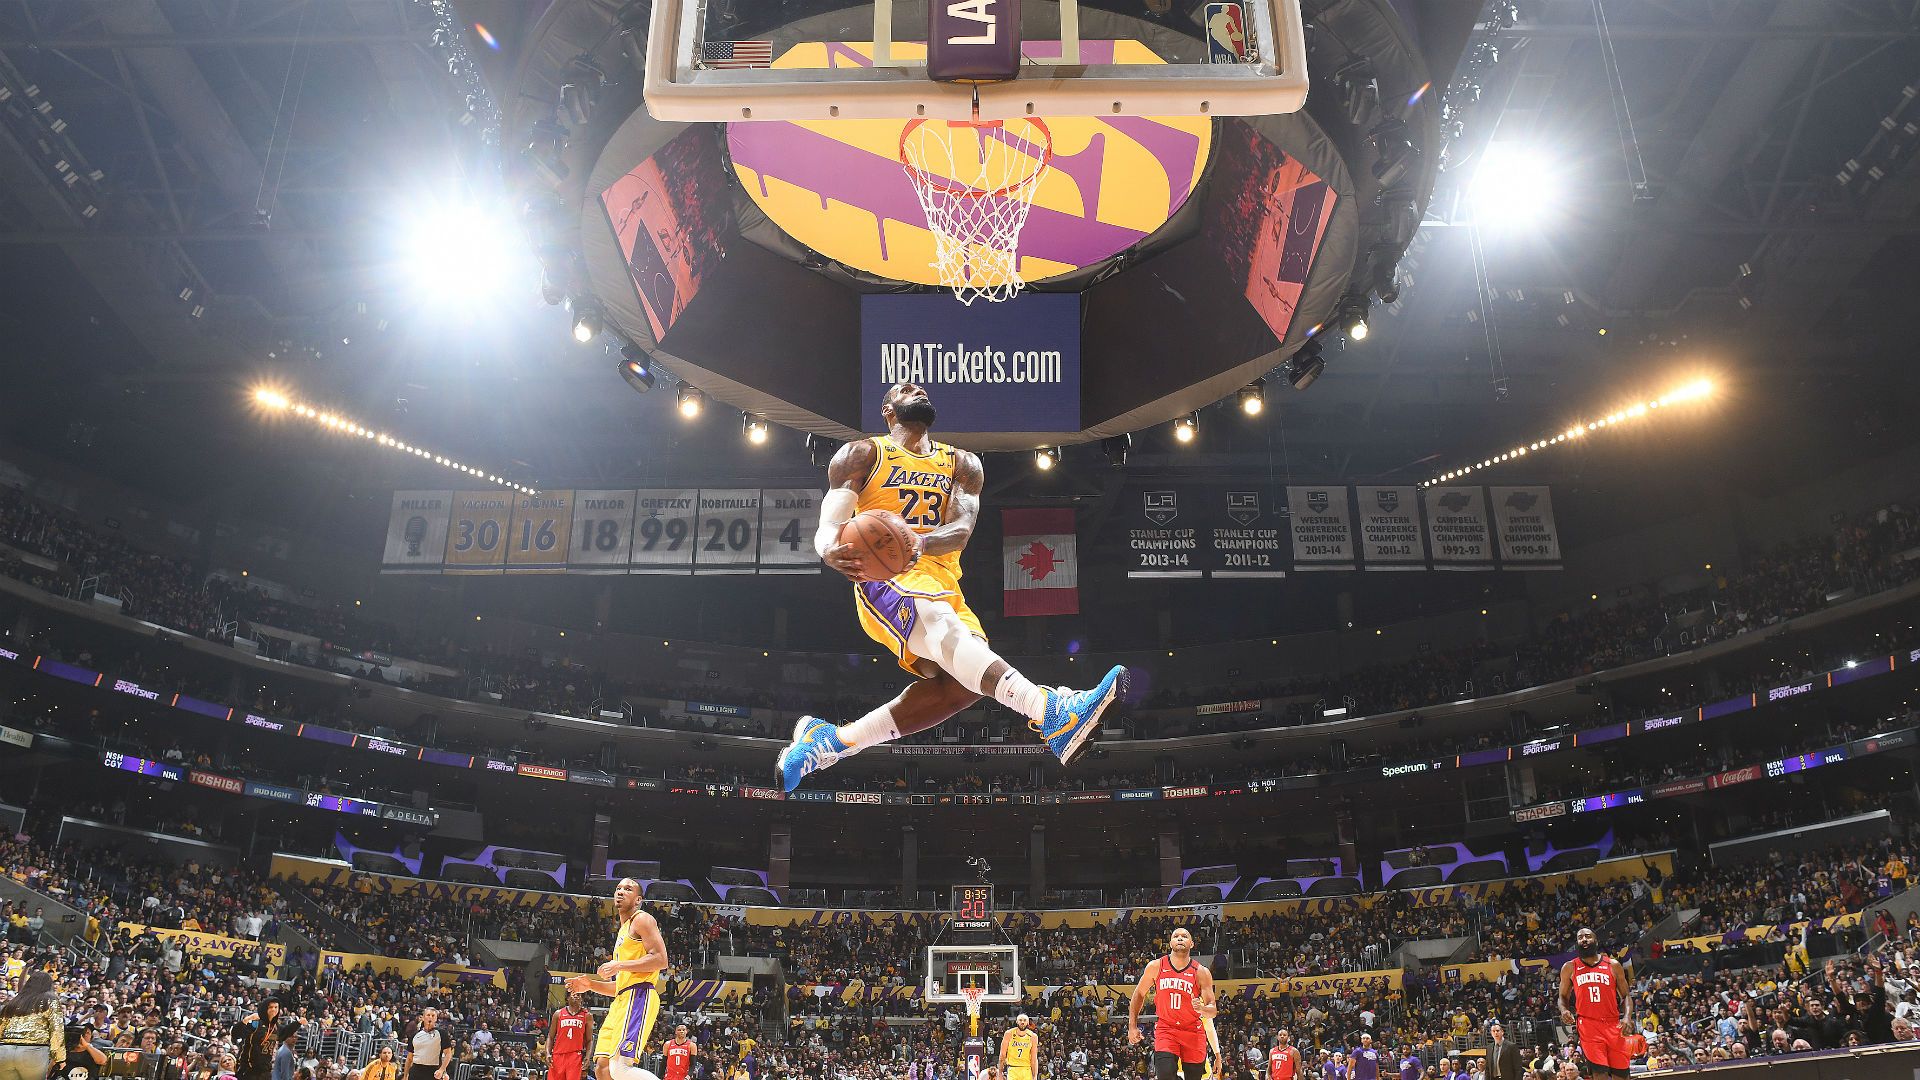 LeBron James dunks: Which photo .in.nba.com